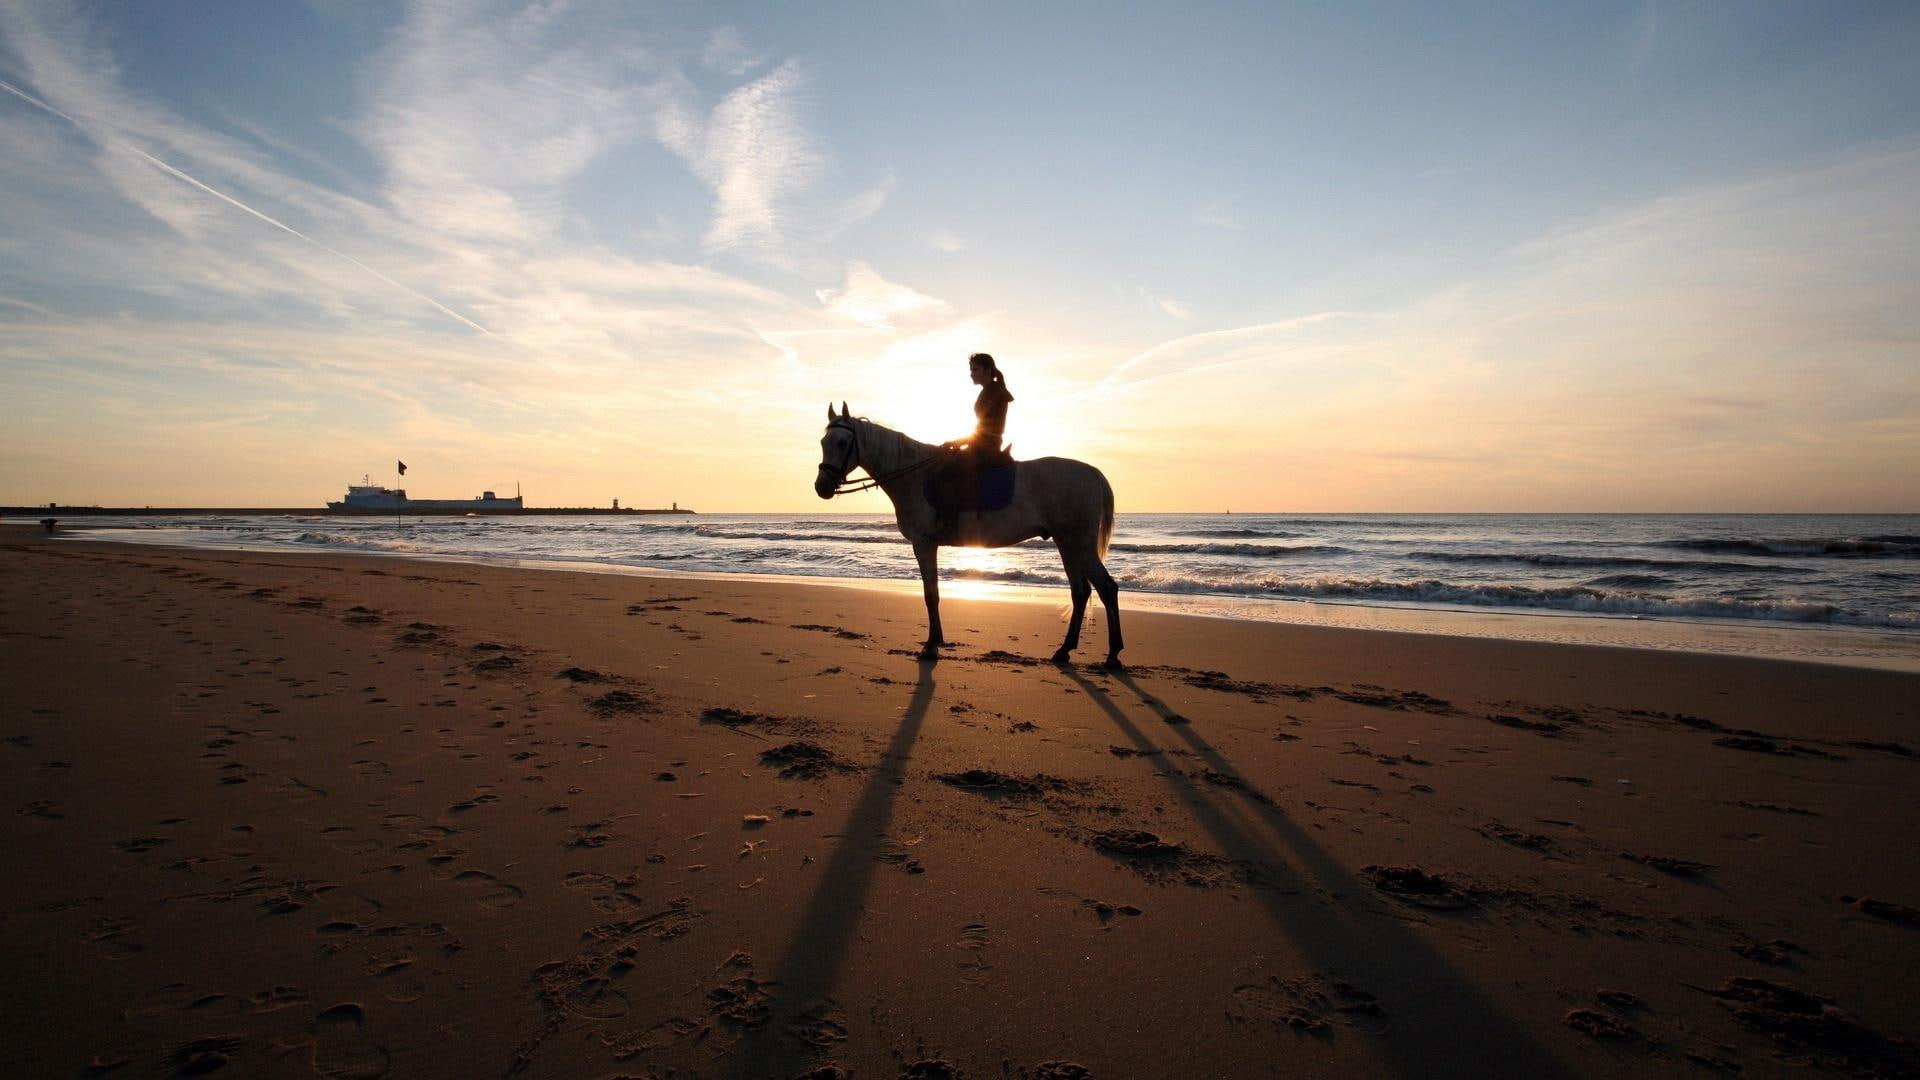 In The Sunset, white and gray horse, beaches, girl, nature, beautiful